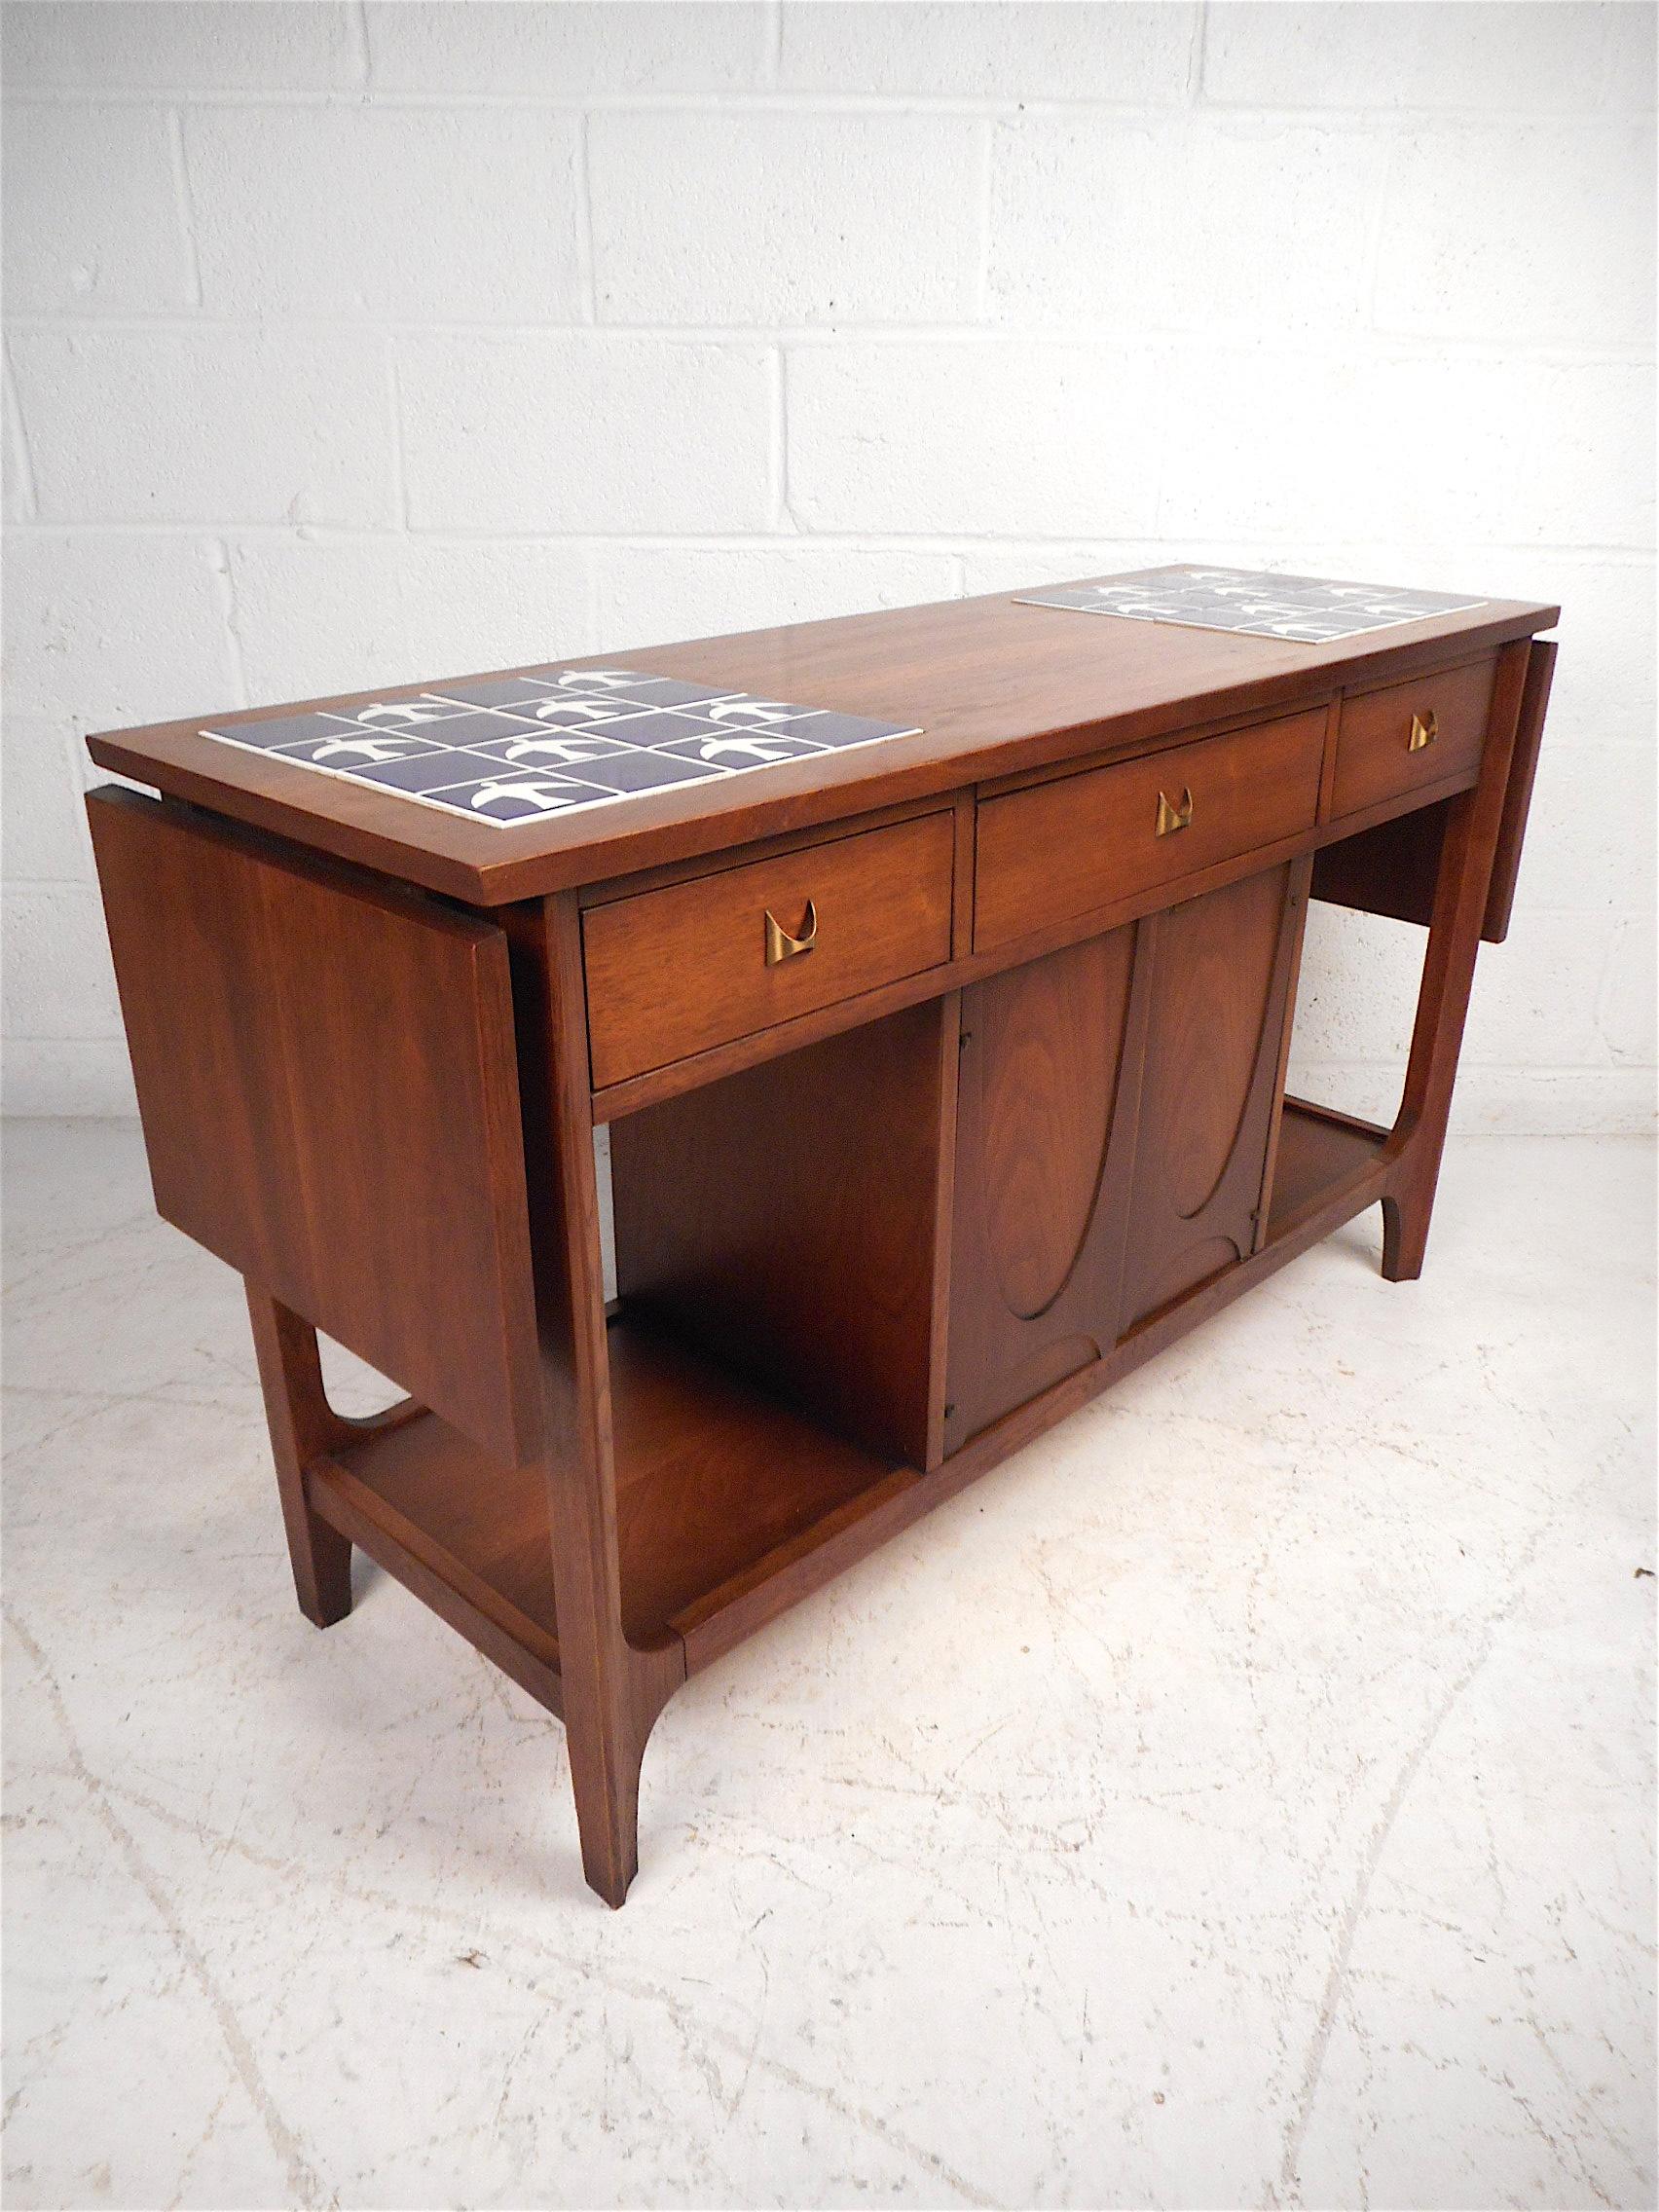 Beautiful Mid-Century Modern console table by Broyhill. Sturdy walnut construction with a finished back, two drop-leaf extensions on either side of the piece which extend the table's surface from 48 in. to 70.5 in. wide. Stylish design with sculpted